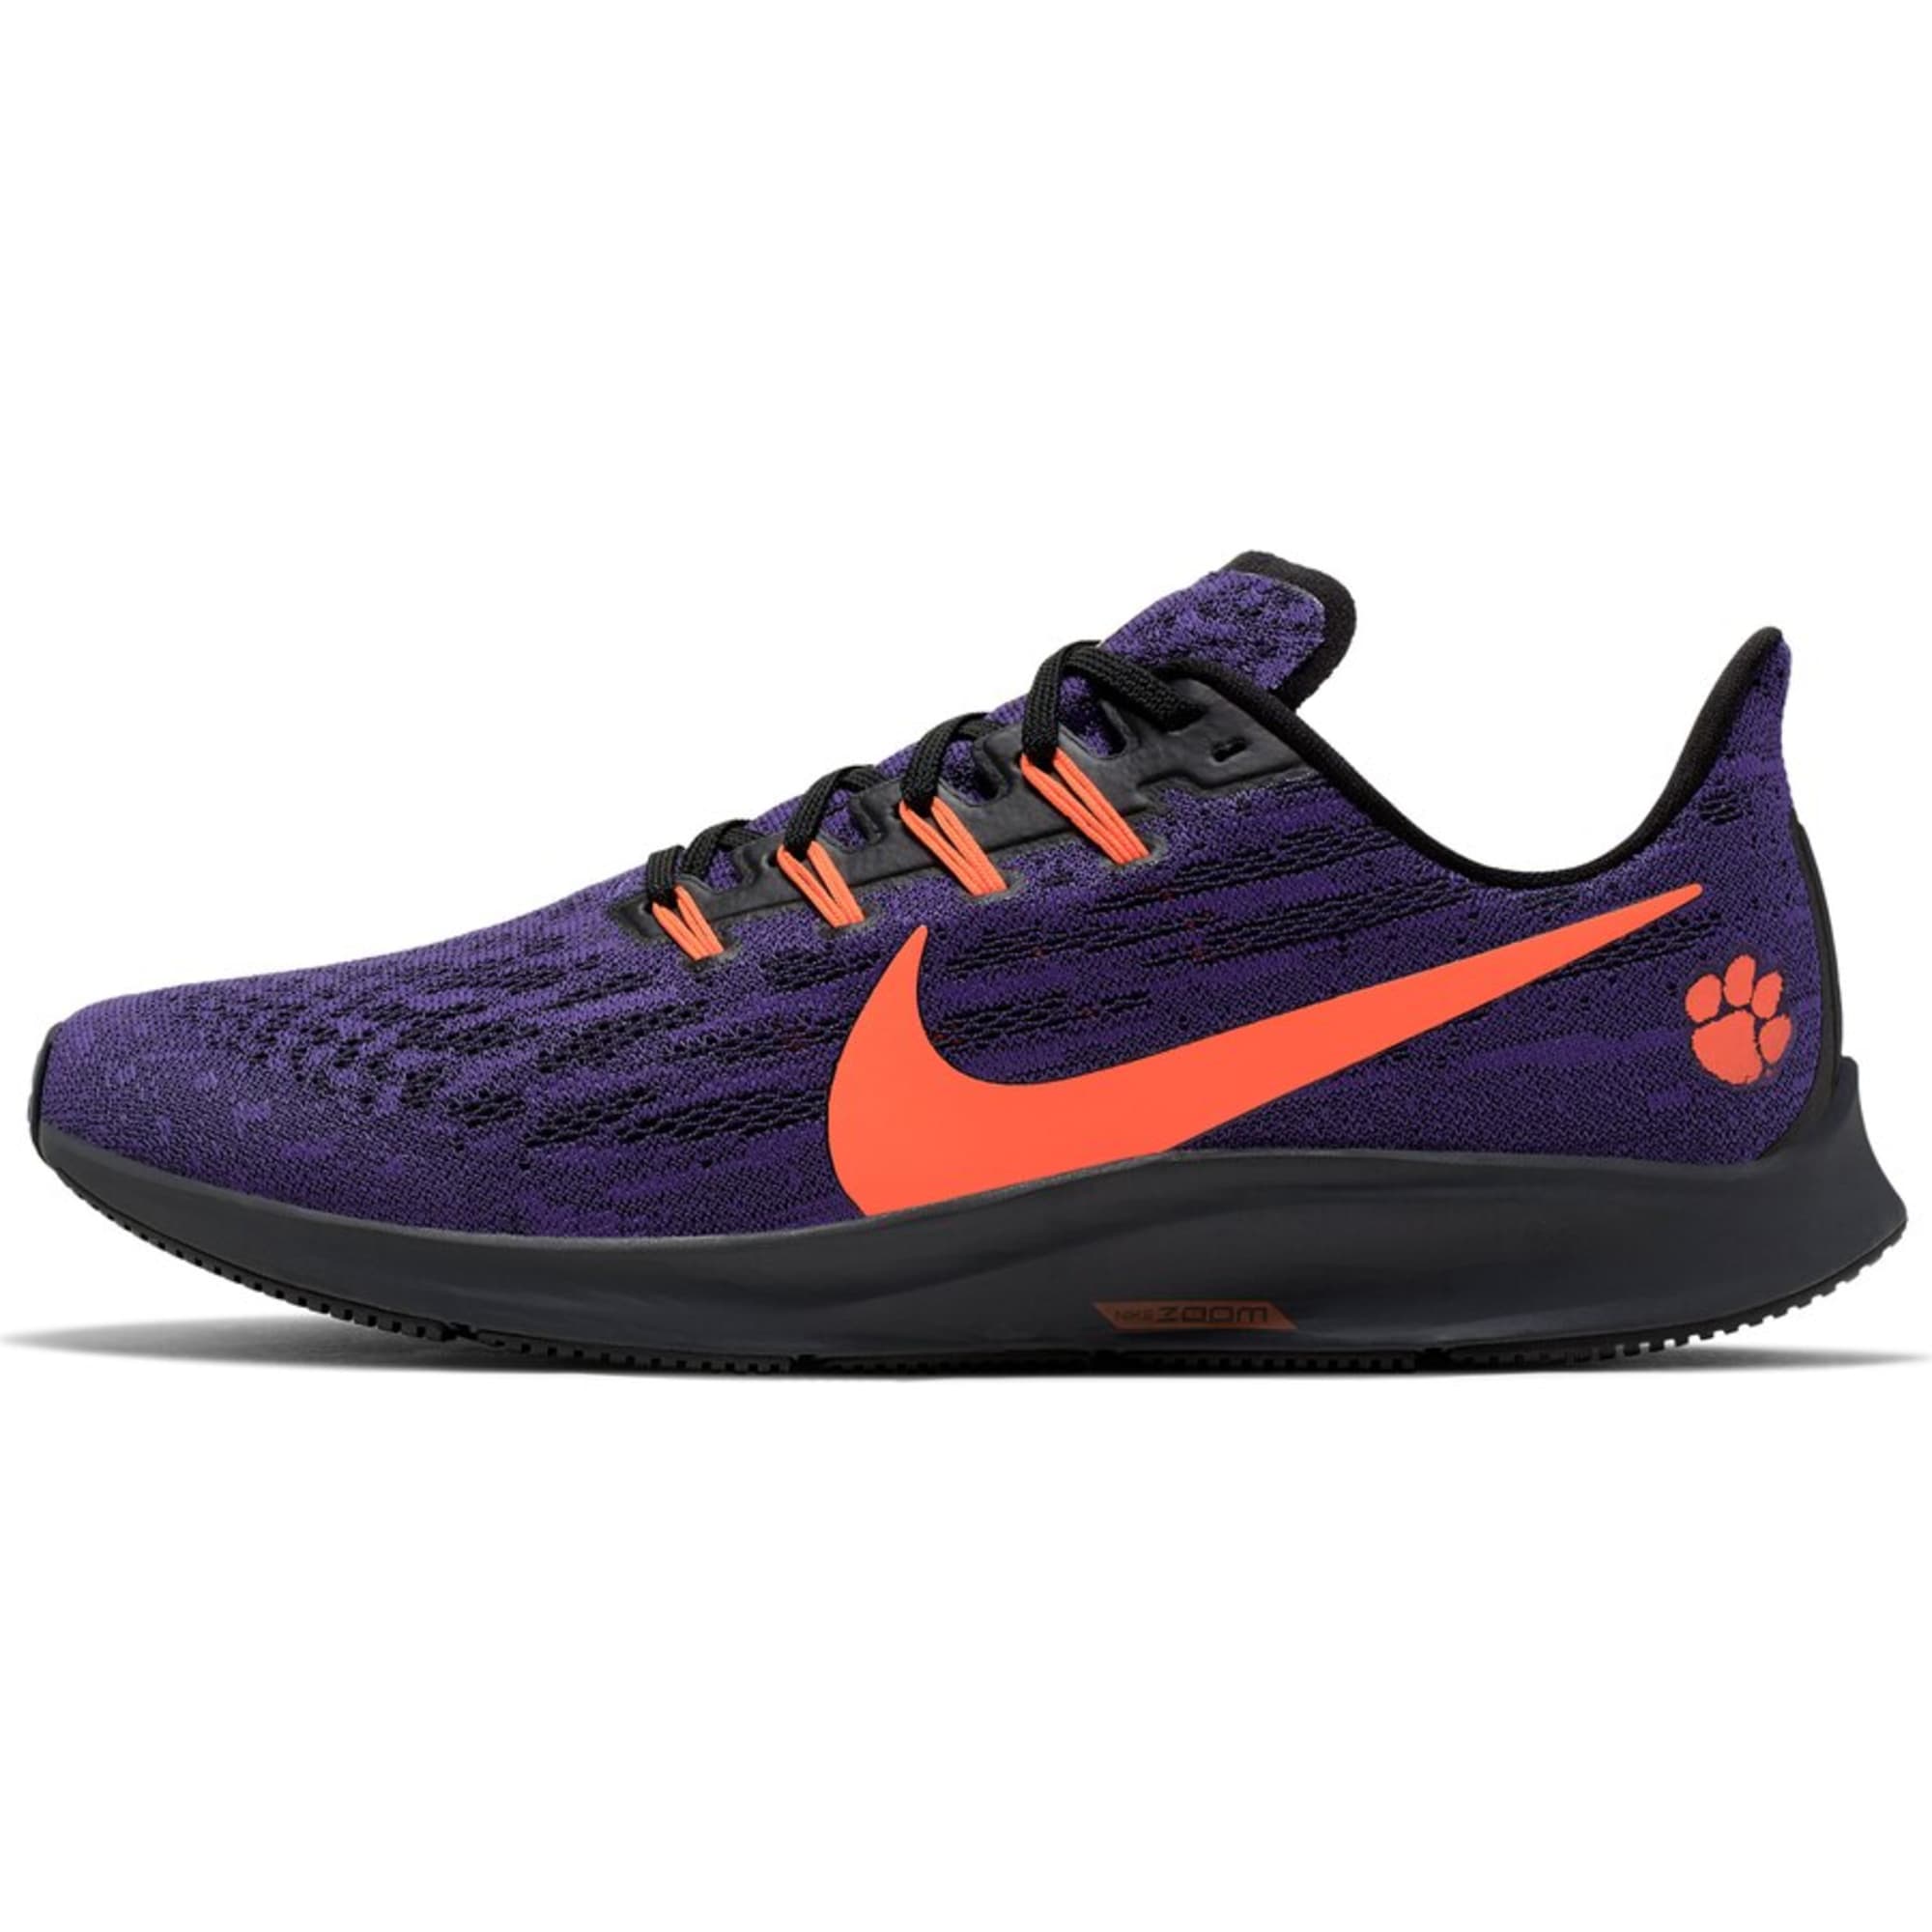 Clemson Tigers fans need these new Nike 